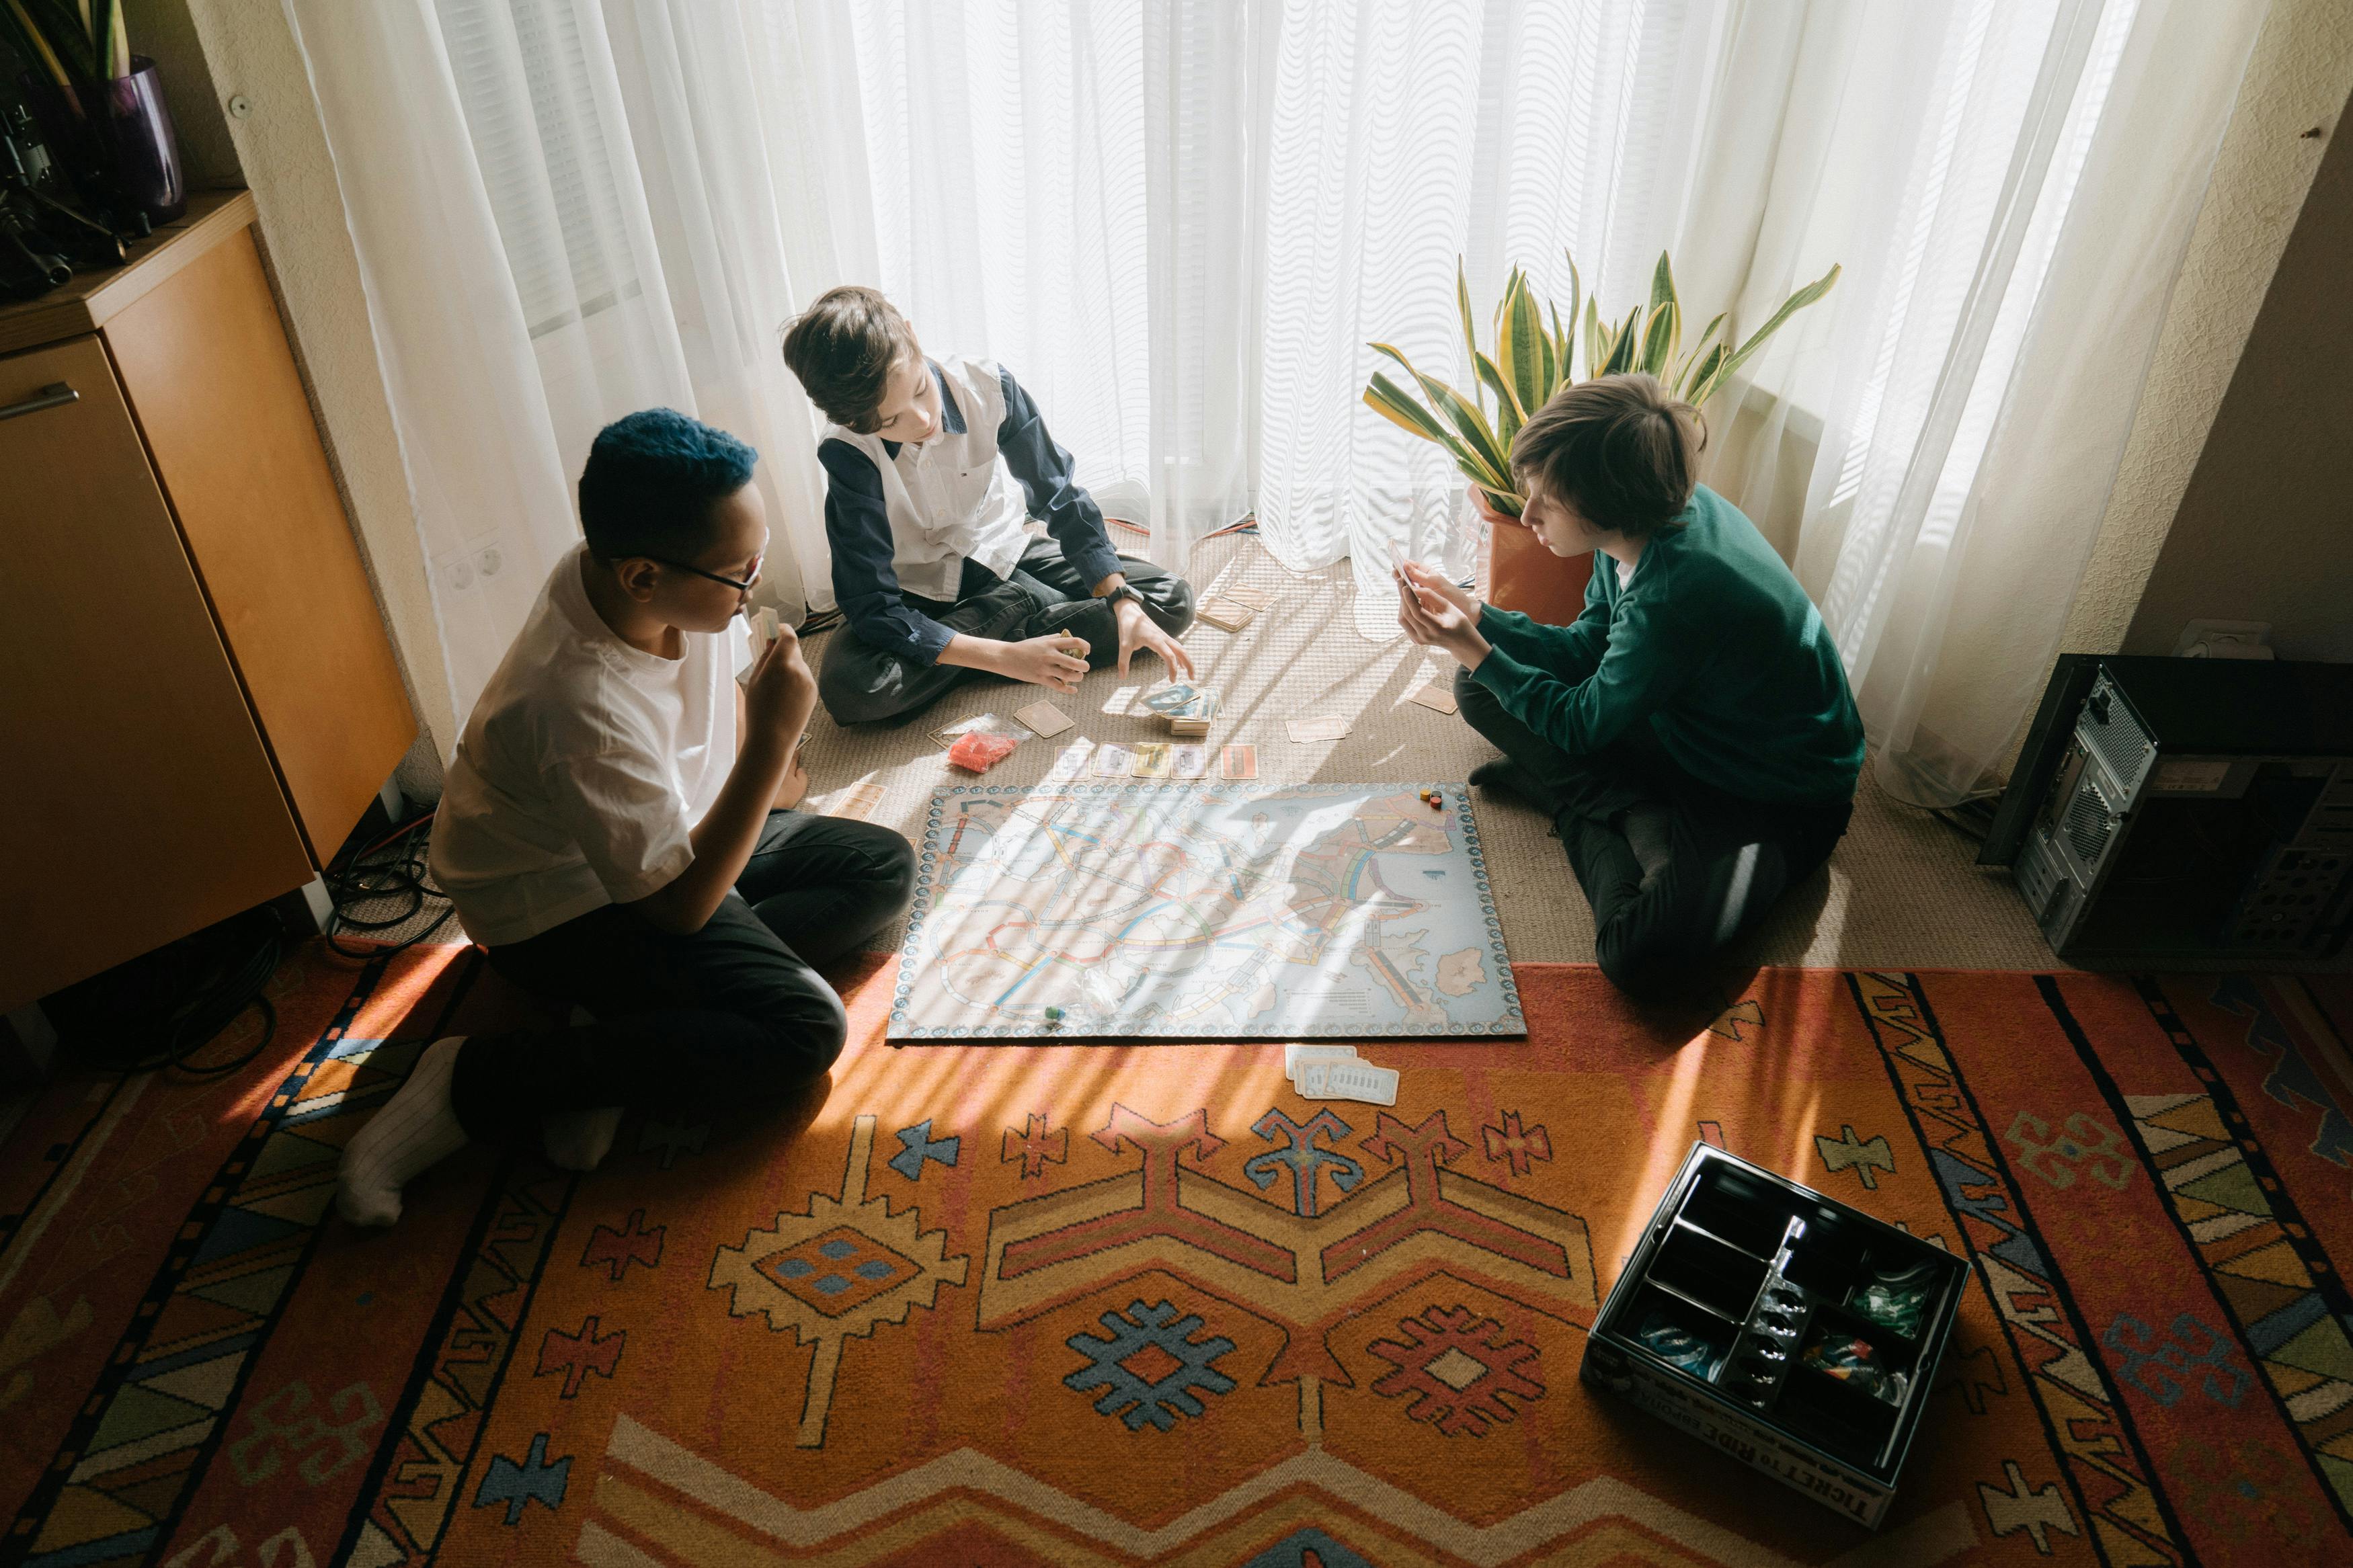 Three people sitting on the floor and playing a board game